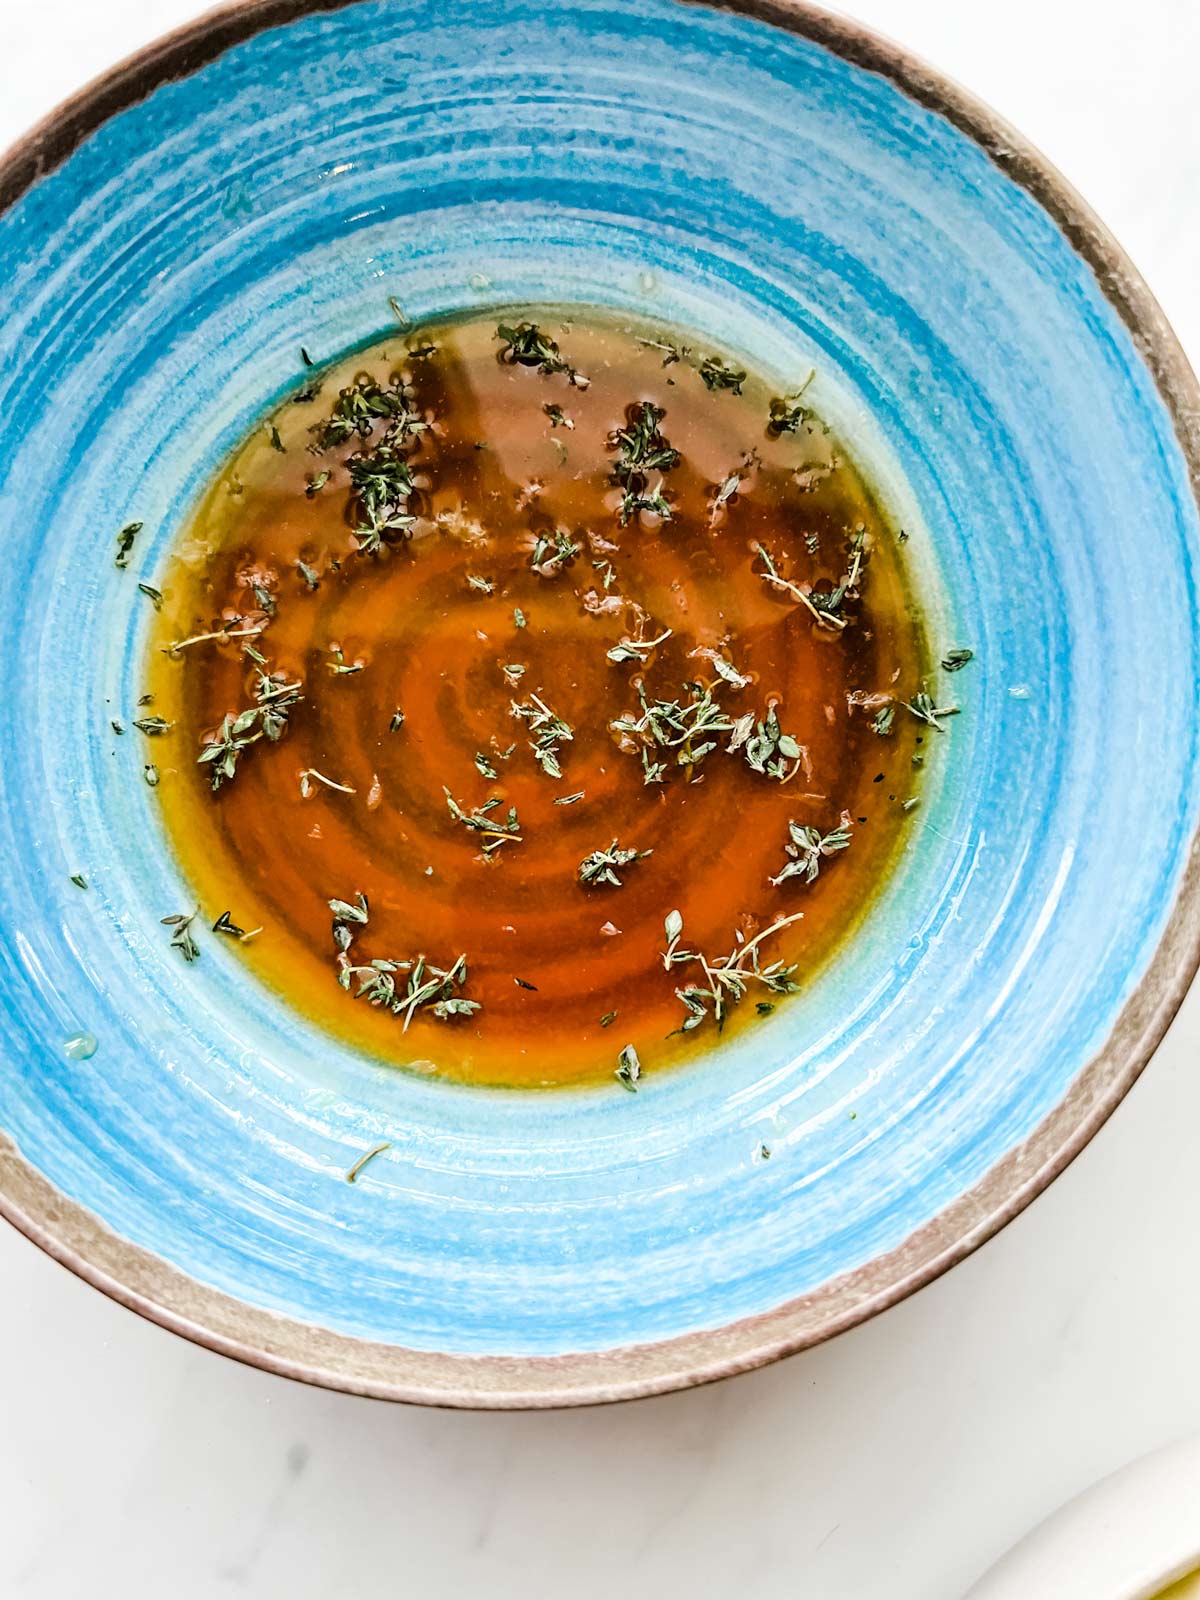 Photo of a small blue bowl with thyme, maple syrup, soy sauce, and lemon juice.